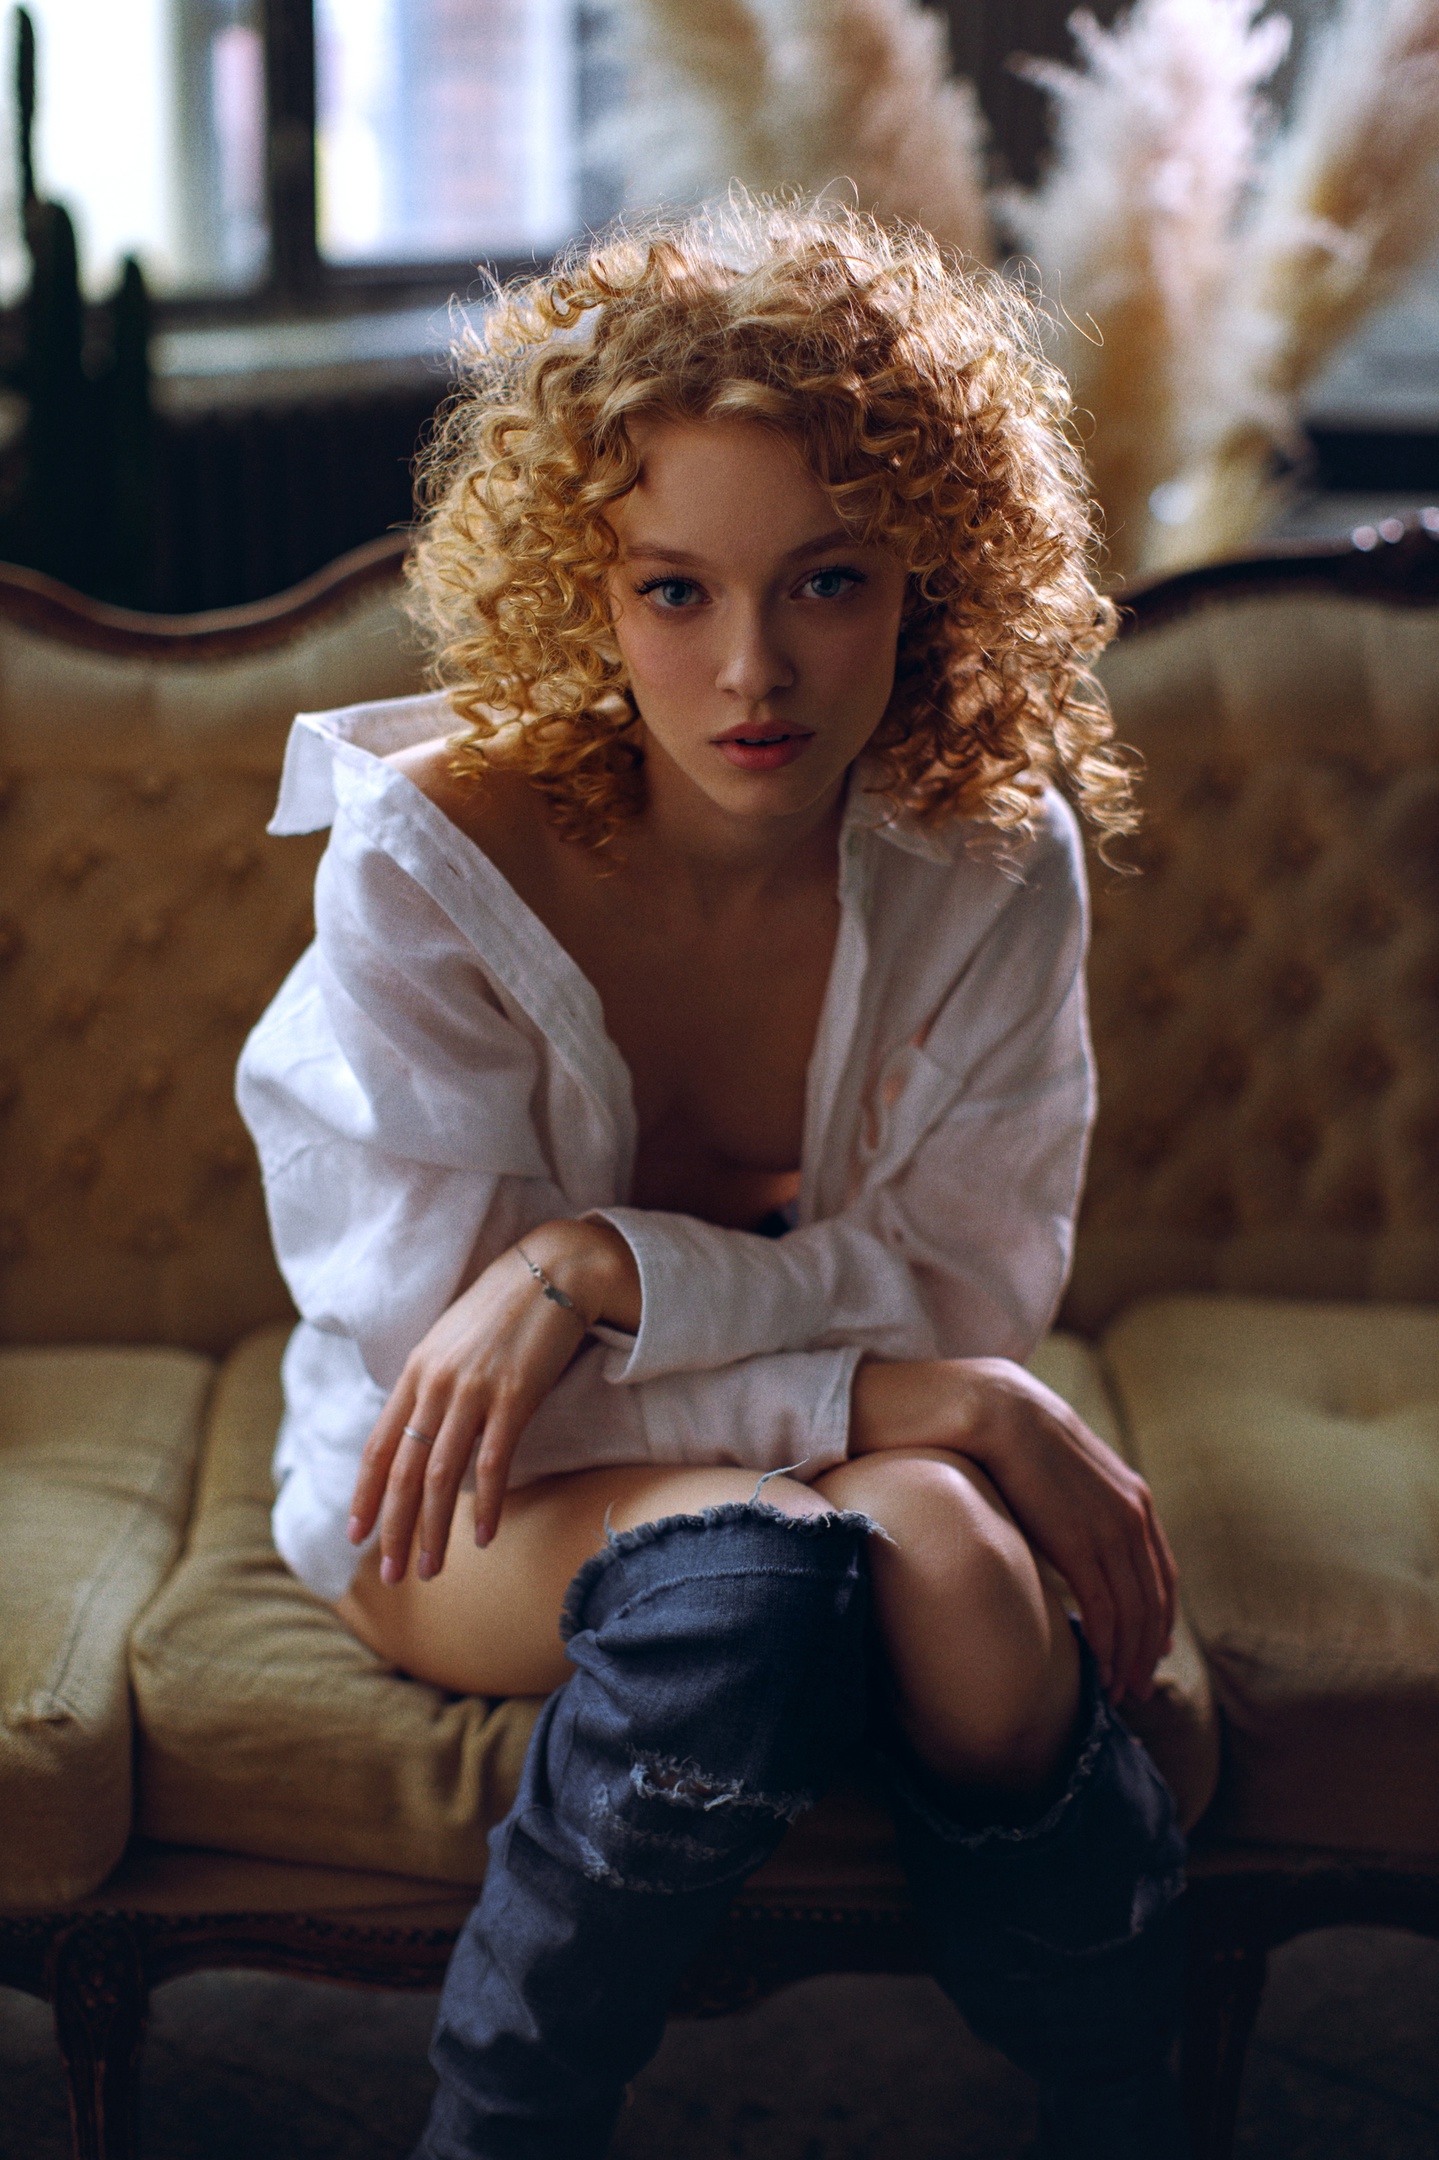 People 1439x2160 Evgeniy Potanin women redhead curly hair undressing torn jeans indoors looking at viewer open shirt no bra